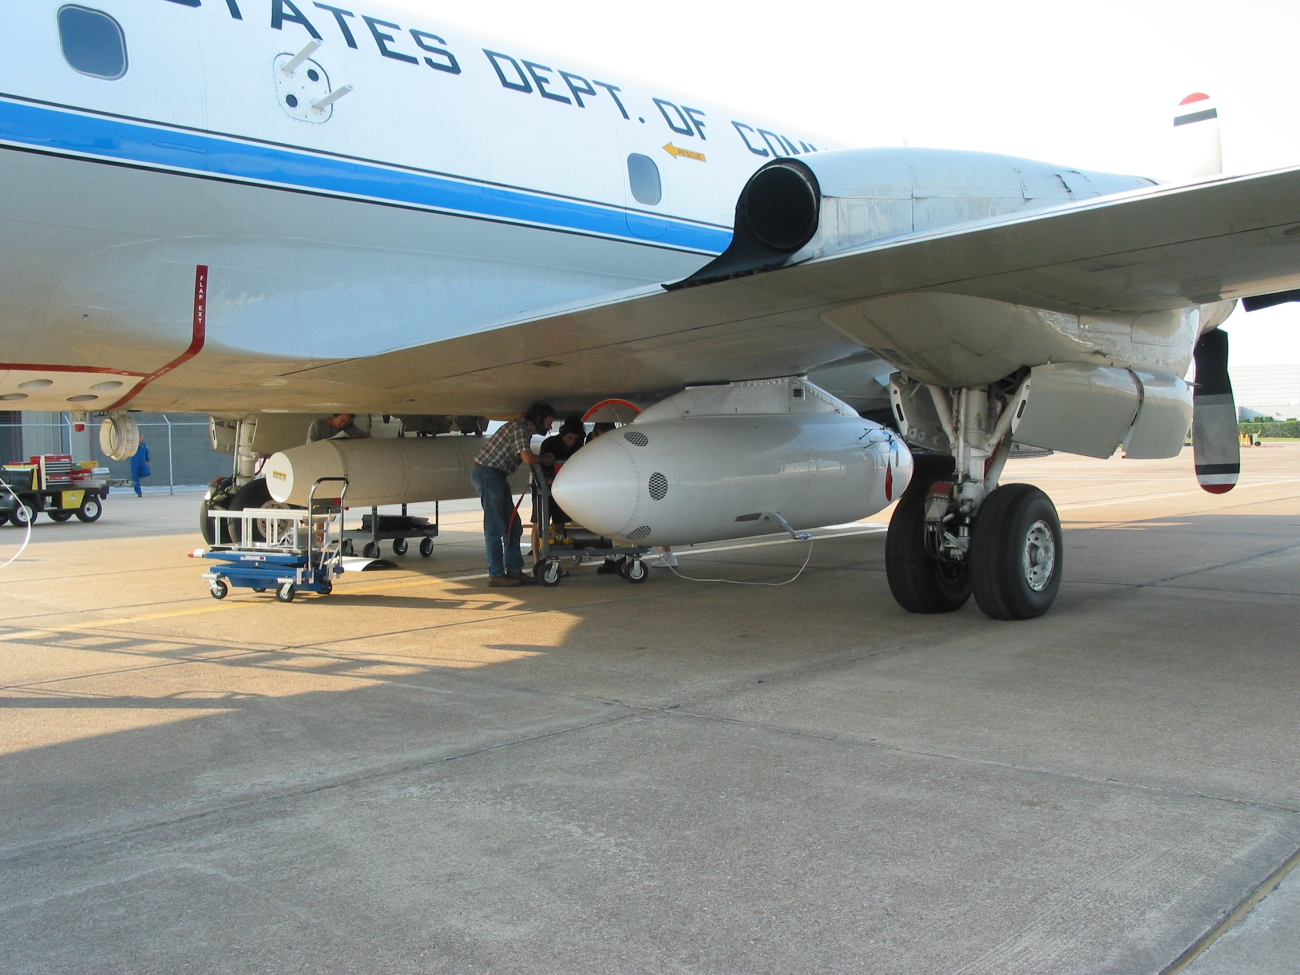 NOAA P-3 research aircraft outfitting for a project